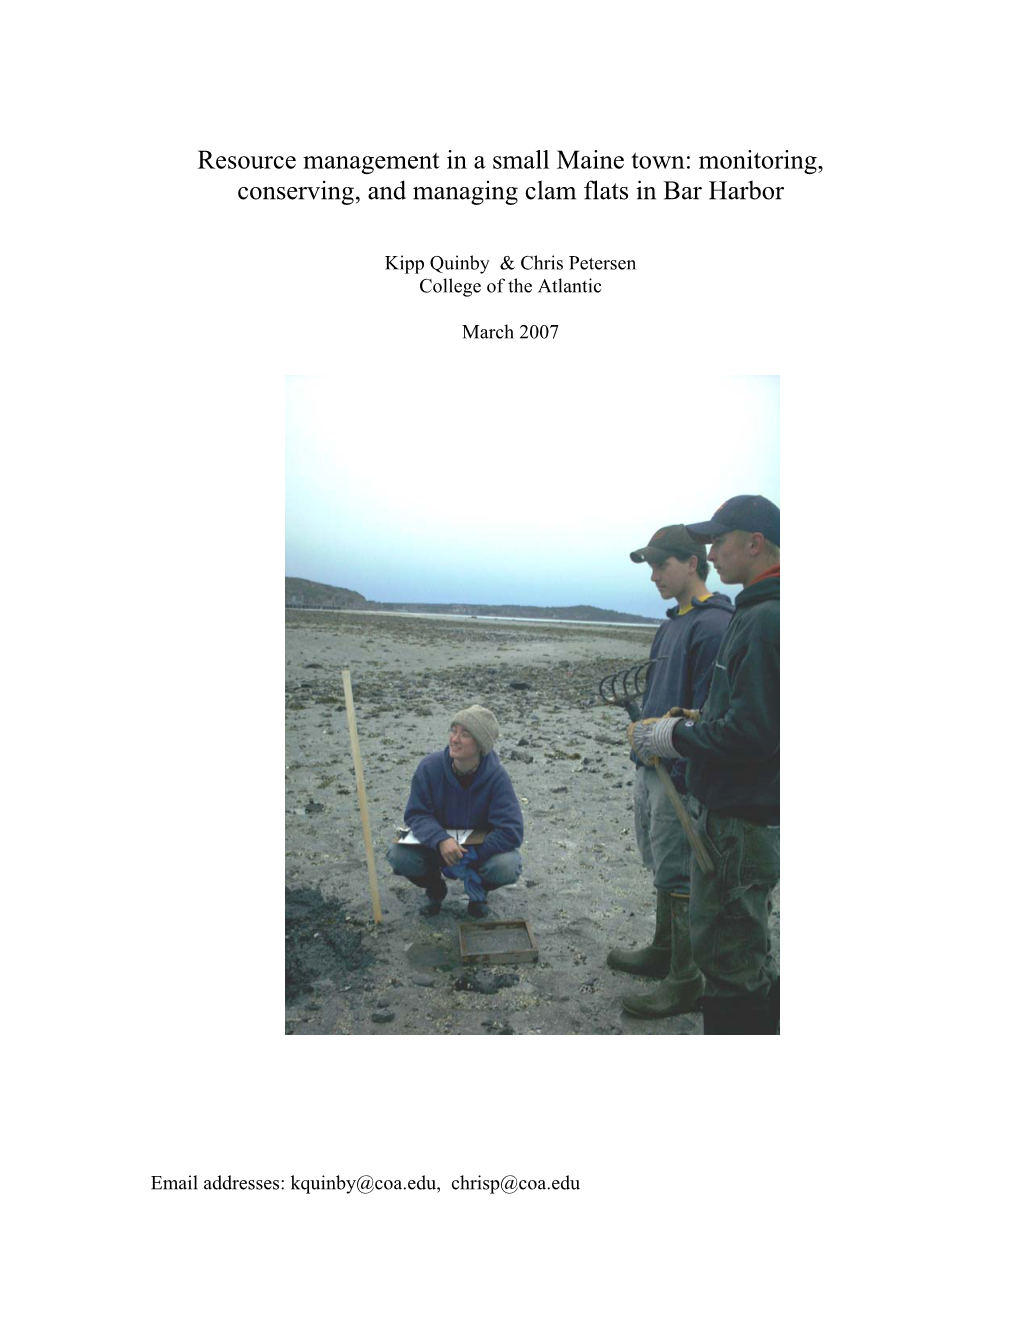 Monitoring, Conserving, and Managing Clam Flats in Bar Harbor